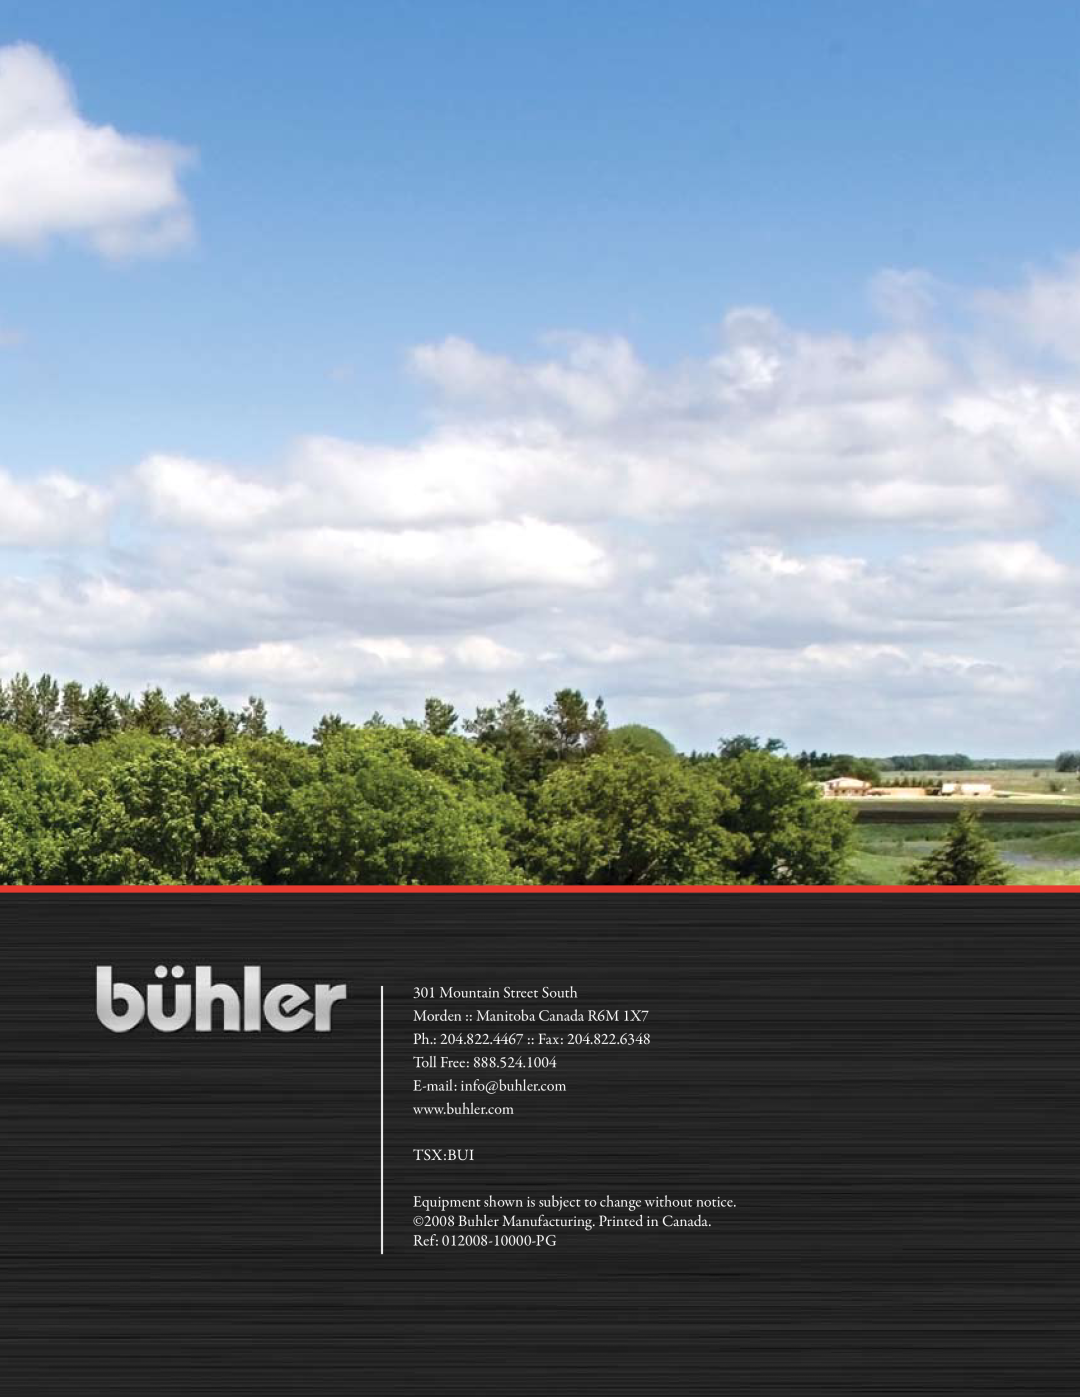 Buhler C8313, C72ss, C8317, C60ss, C84ss Mountain Street South, Morden Manitoba Canada R6M, Ph. 204.822.4467 Fax Toll Free 